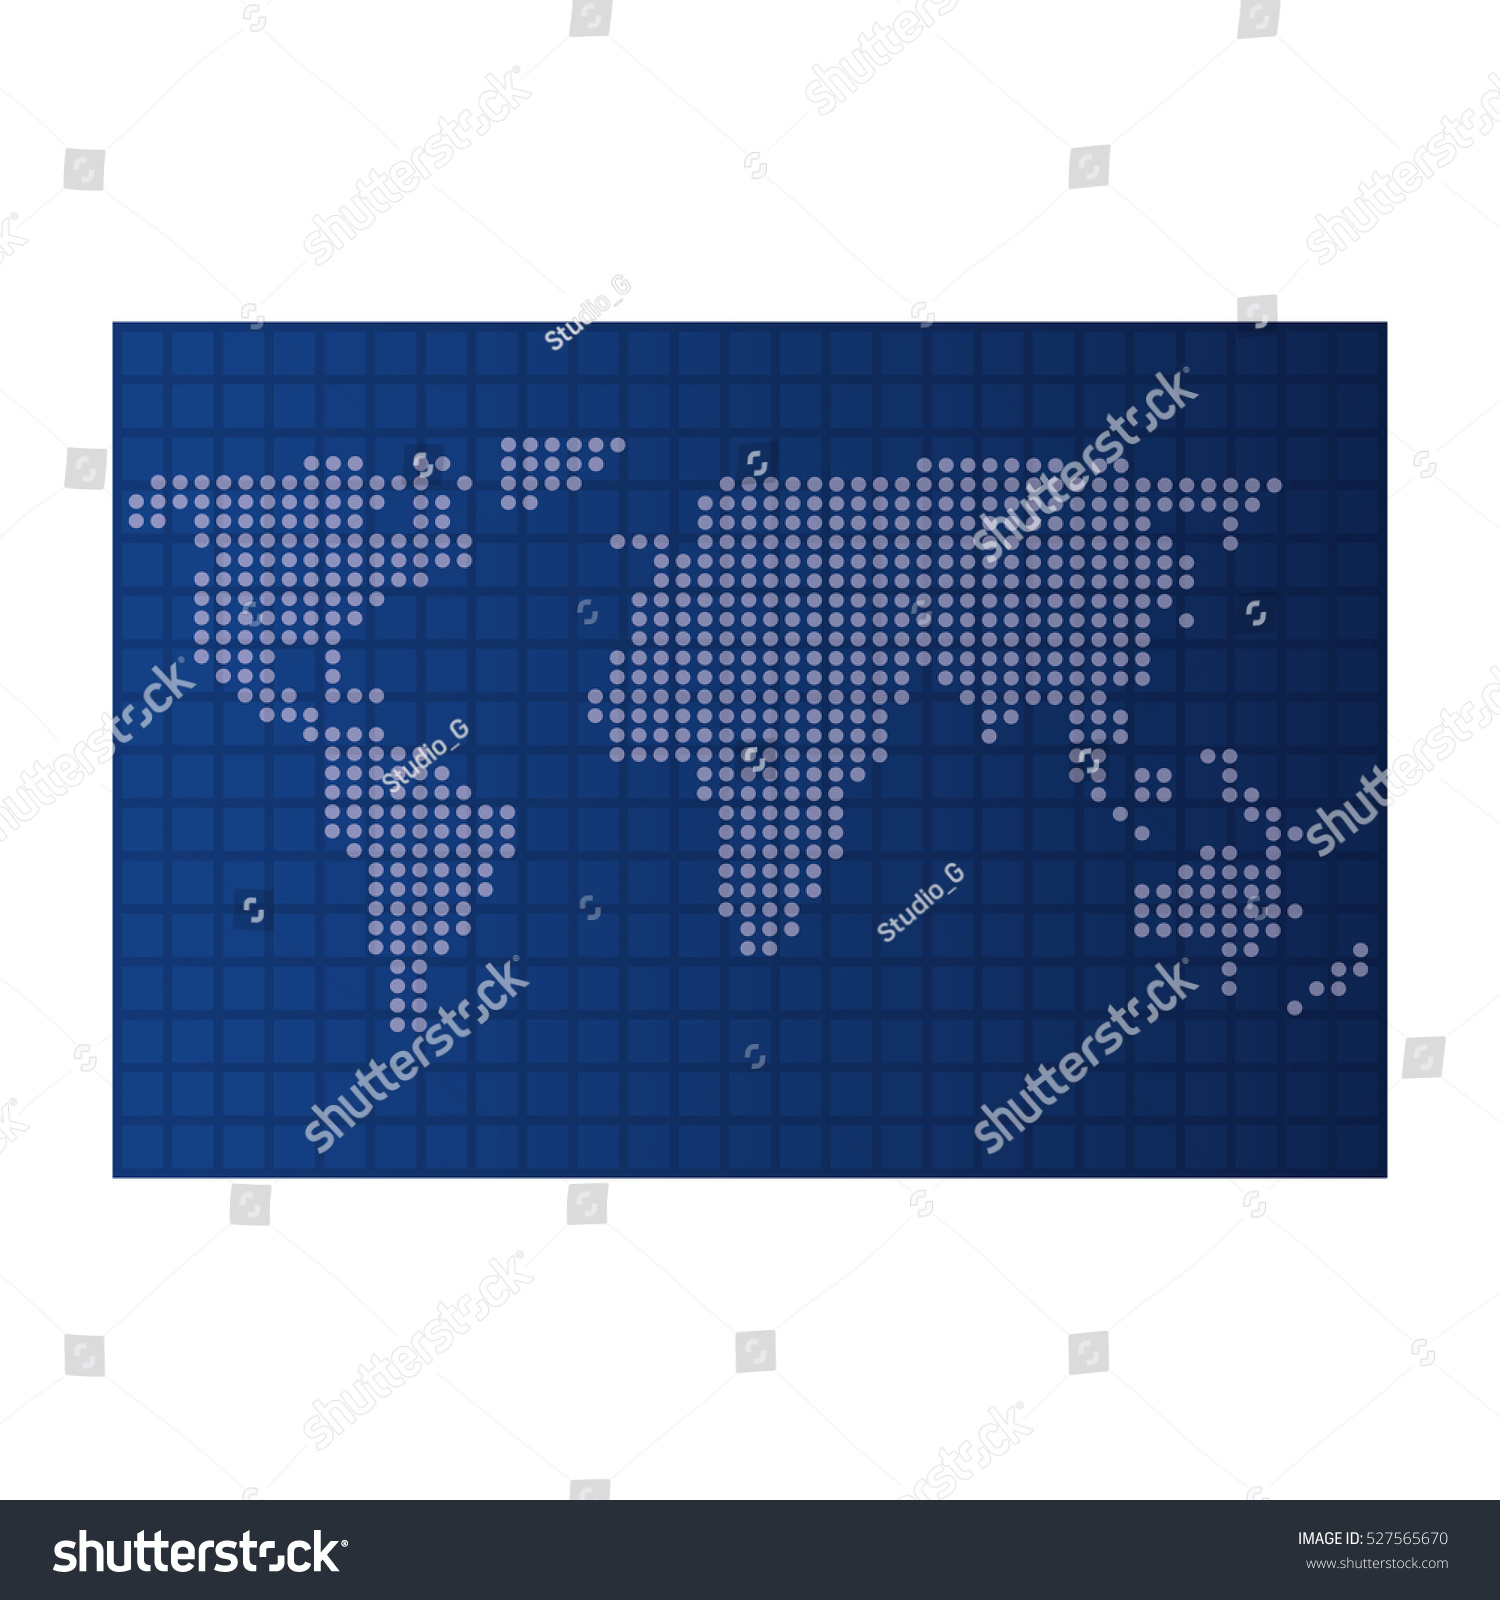 World Planet Earth Map Stock Vector Royalty Free 527565670 Shutterstock 3293